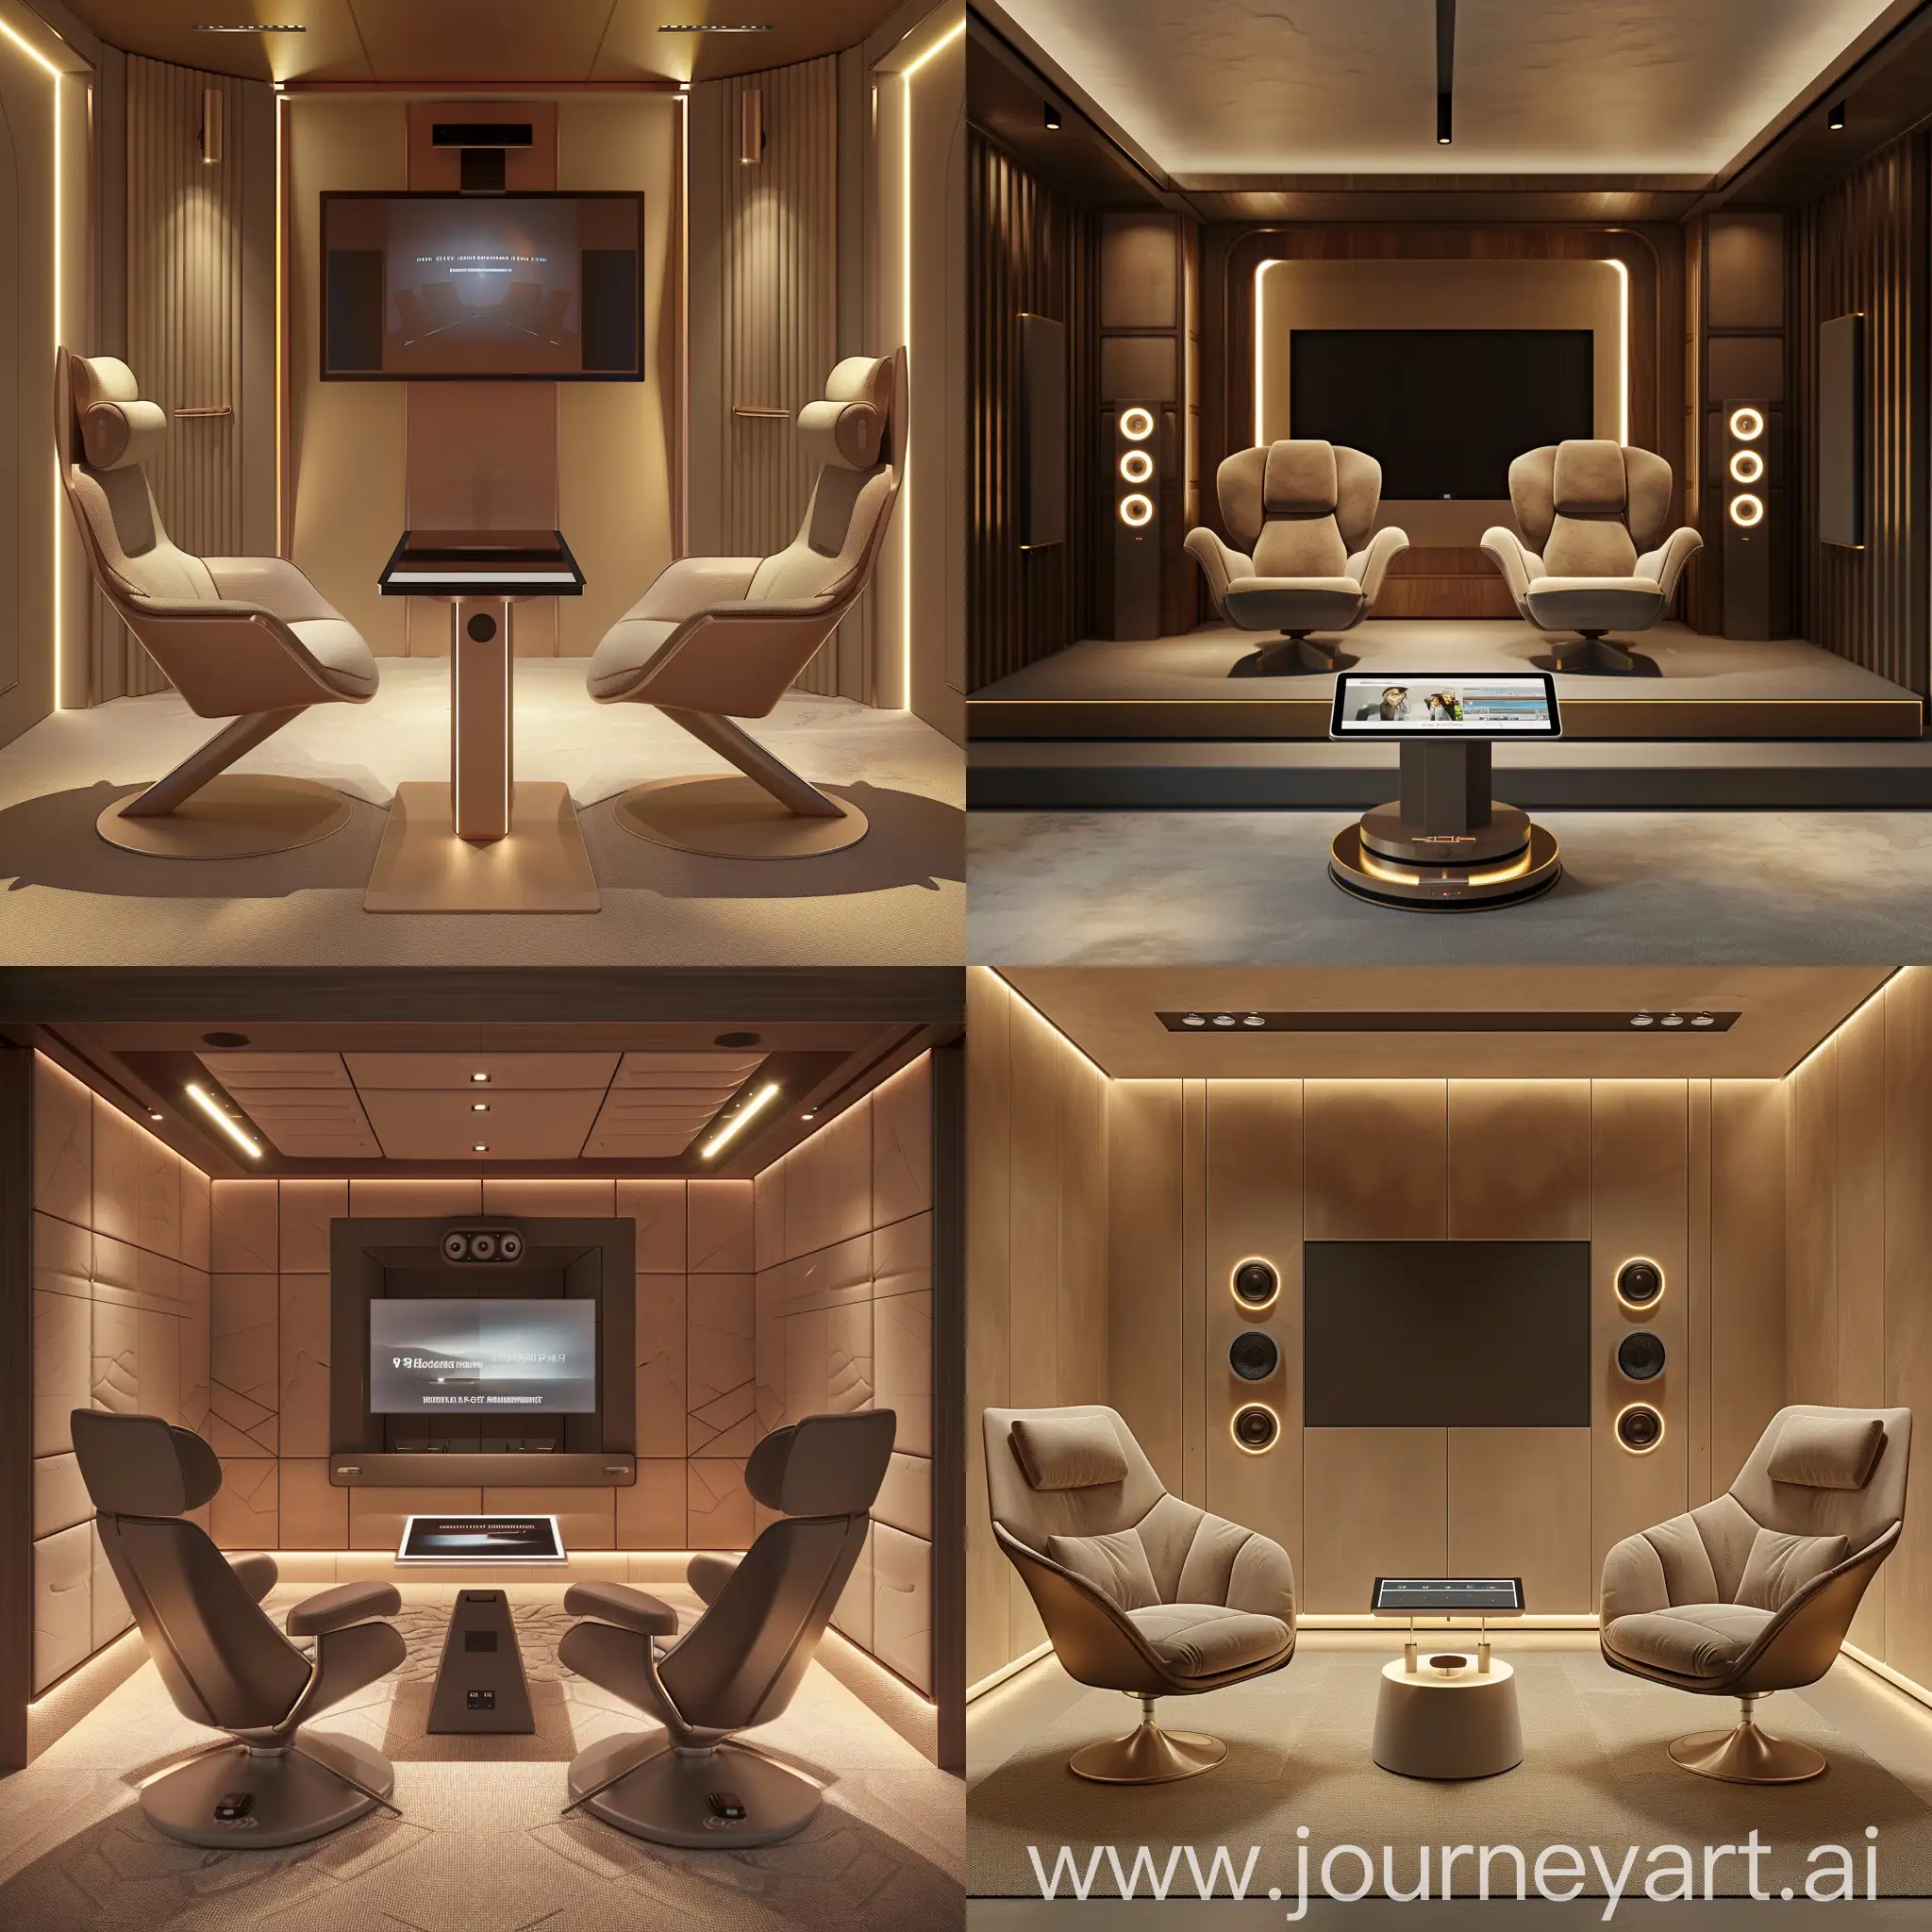 Generate a rendered image depicting a high-end audiovisual room within a confined space of only 9m2. The room is designed to accommodate only two chairs and a horizontal touchscreen mounted on a base. The ambiance should evoke a cinematic experience, offering comfort and pleasure. Design elements should exude elegance, incorporating warm tones, premium materials, and exclusive details. Include high-resolution projection systems, strategically placed surround sound speakers, and plush seating for two. Emphasize a visually appealing setup for video presentations to captivate potential buyers about the real estate project. Despite the limited space, highlight comfort, sophistication, and exclusivity in the design